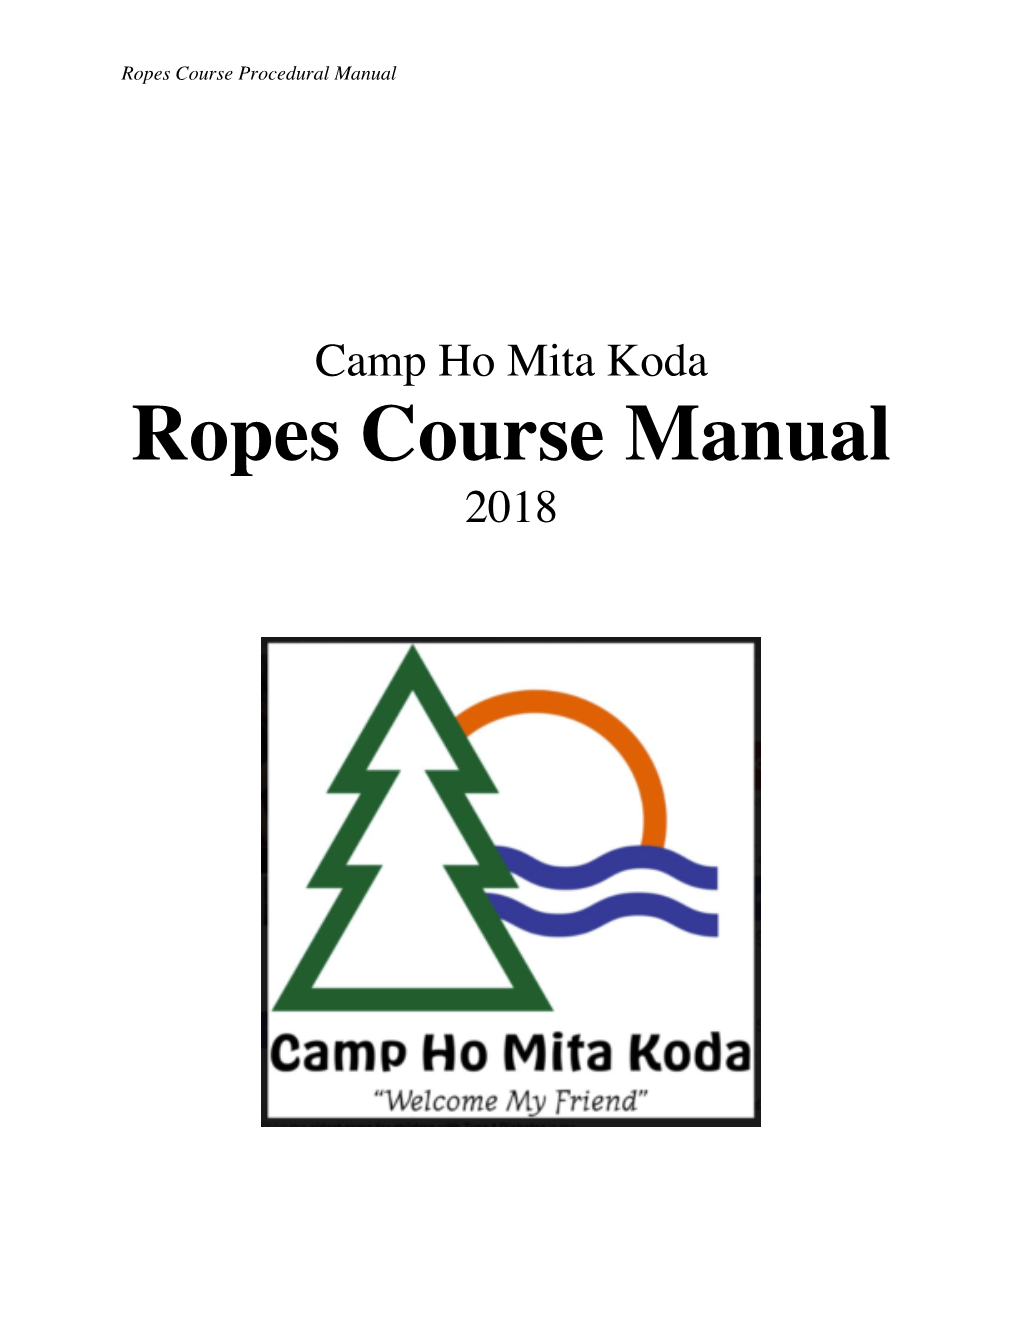 Ropes Course Manual 2018